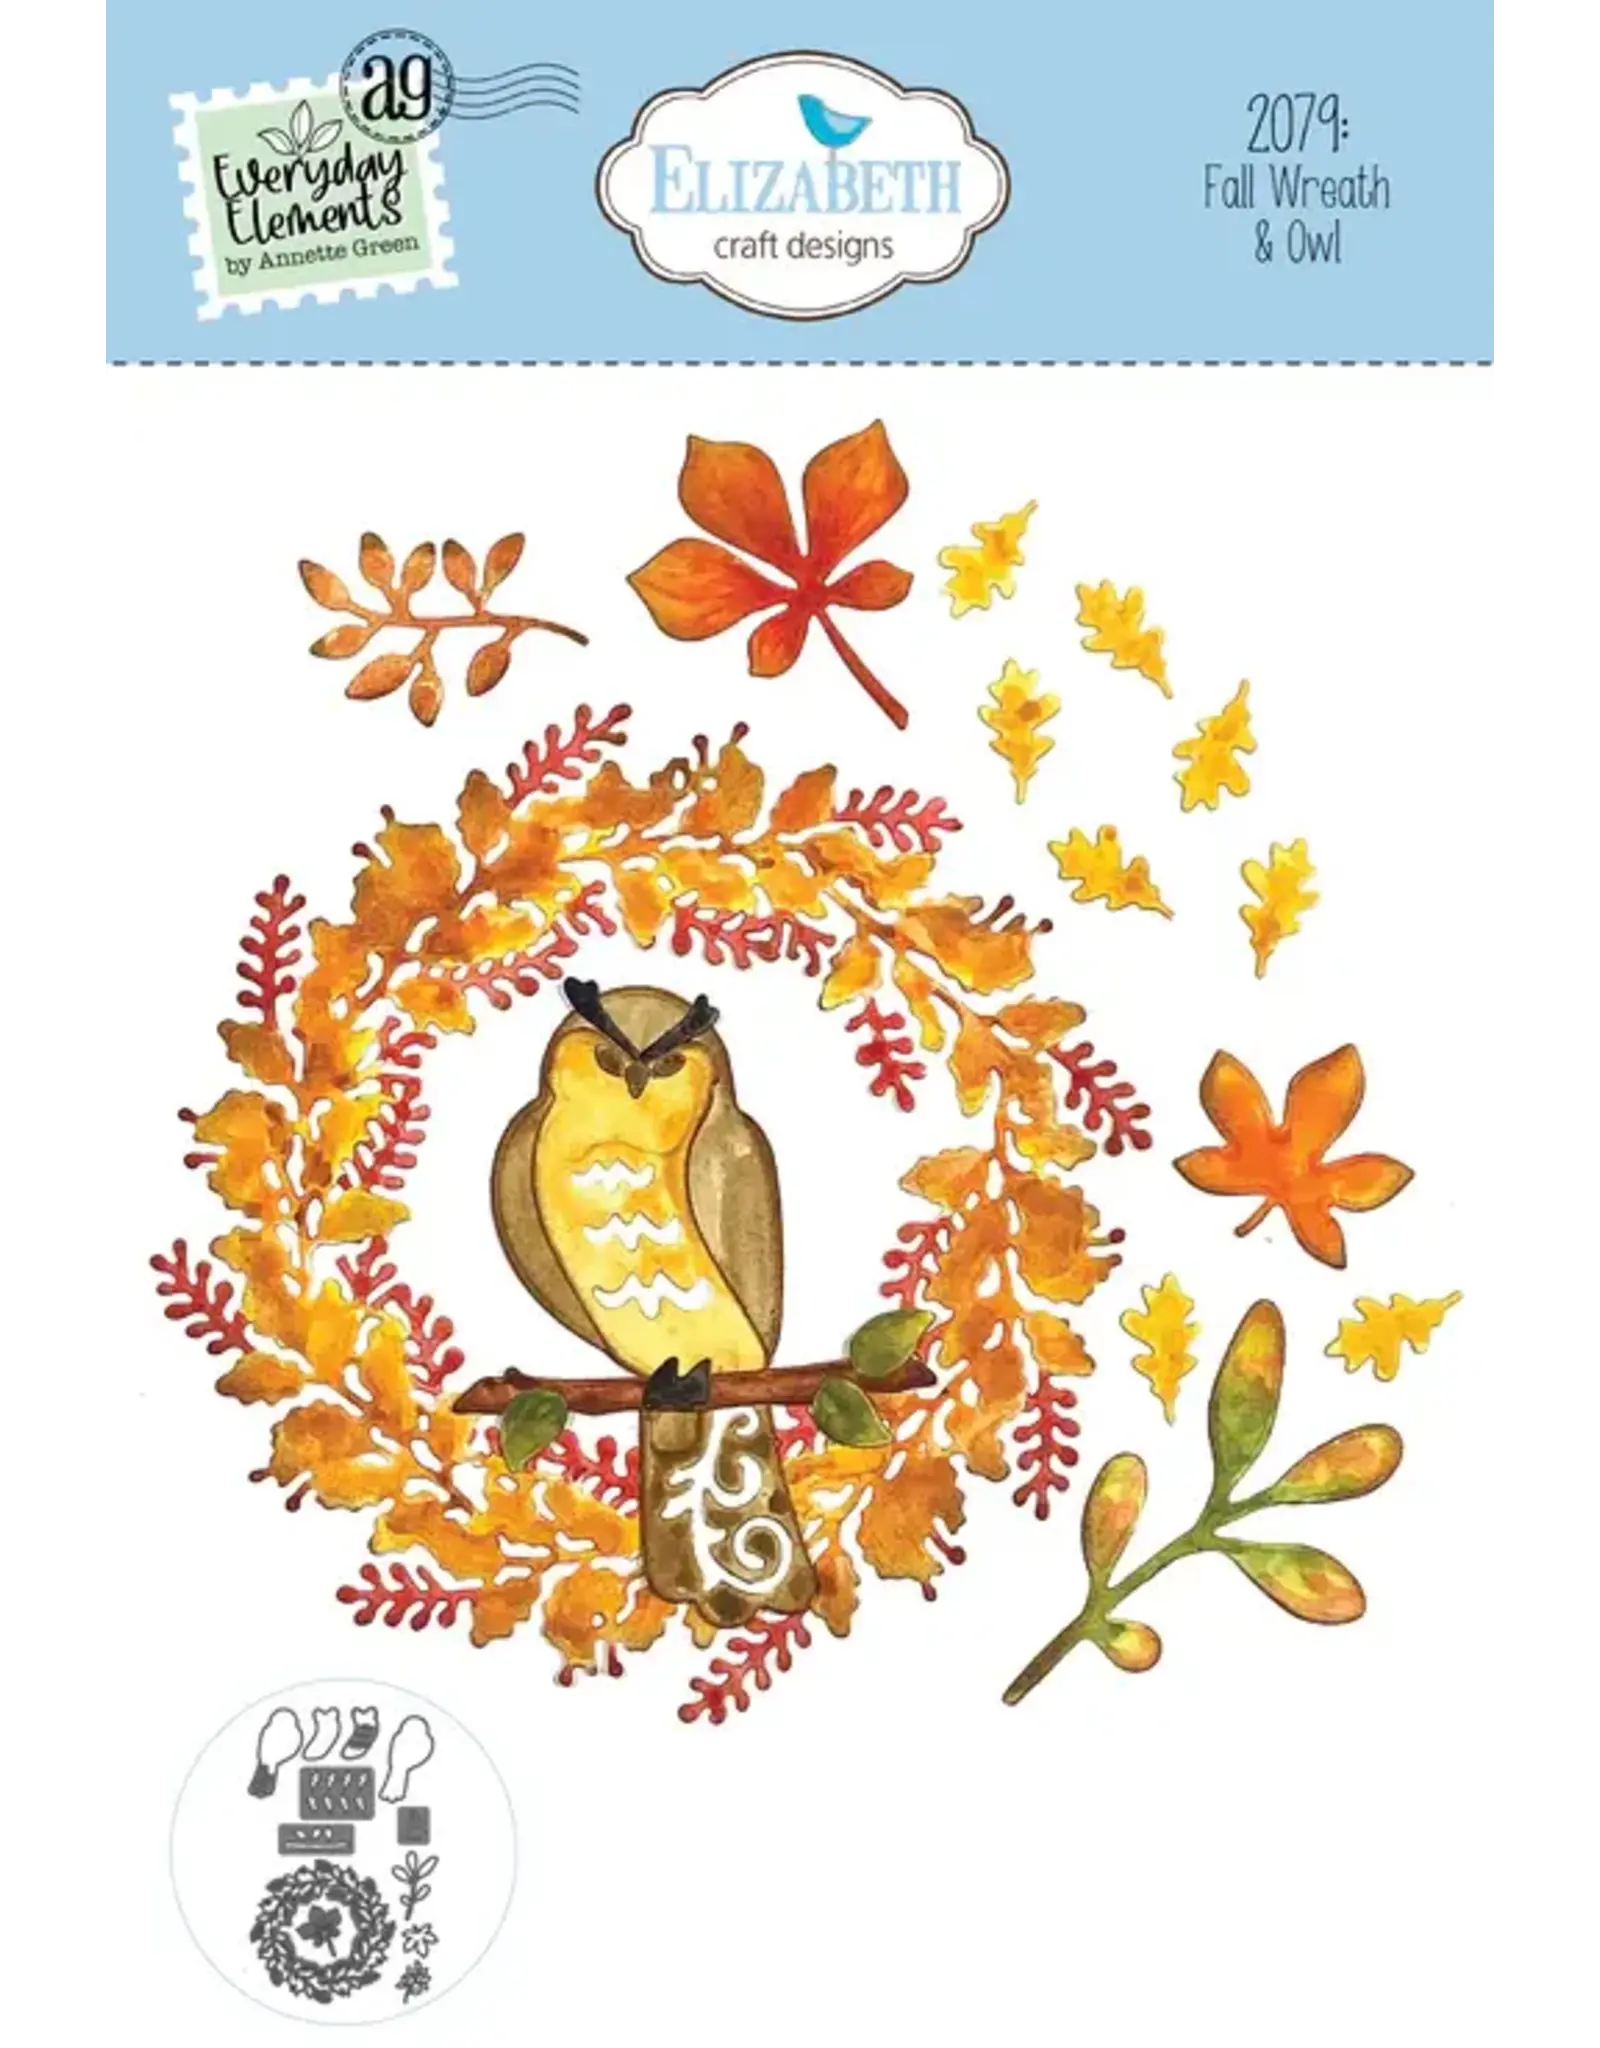 ELIZABETH CRAFT DESIGNS ELIZABETH CRAFT DESIGNS EVERYDAY ELEMENTS BY ANNETTE GREEN FALL WREATH & OWL DIE SET